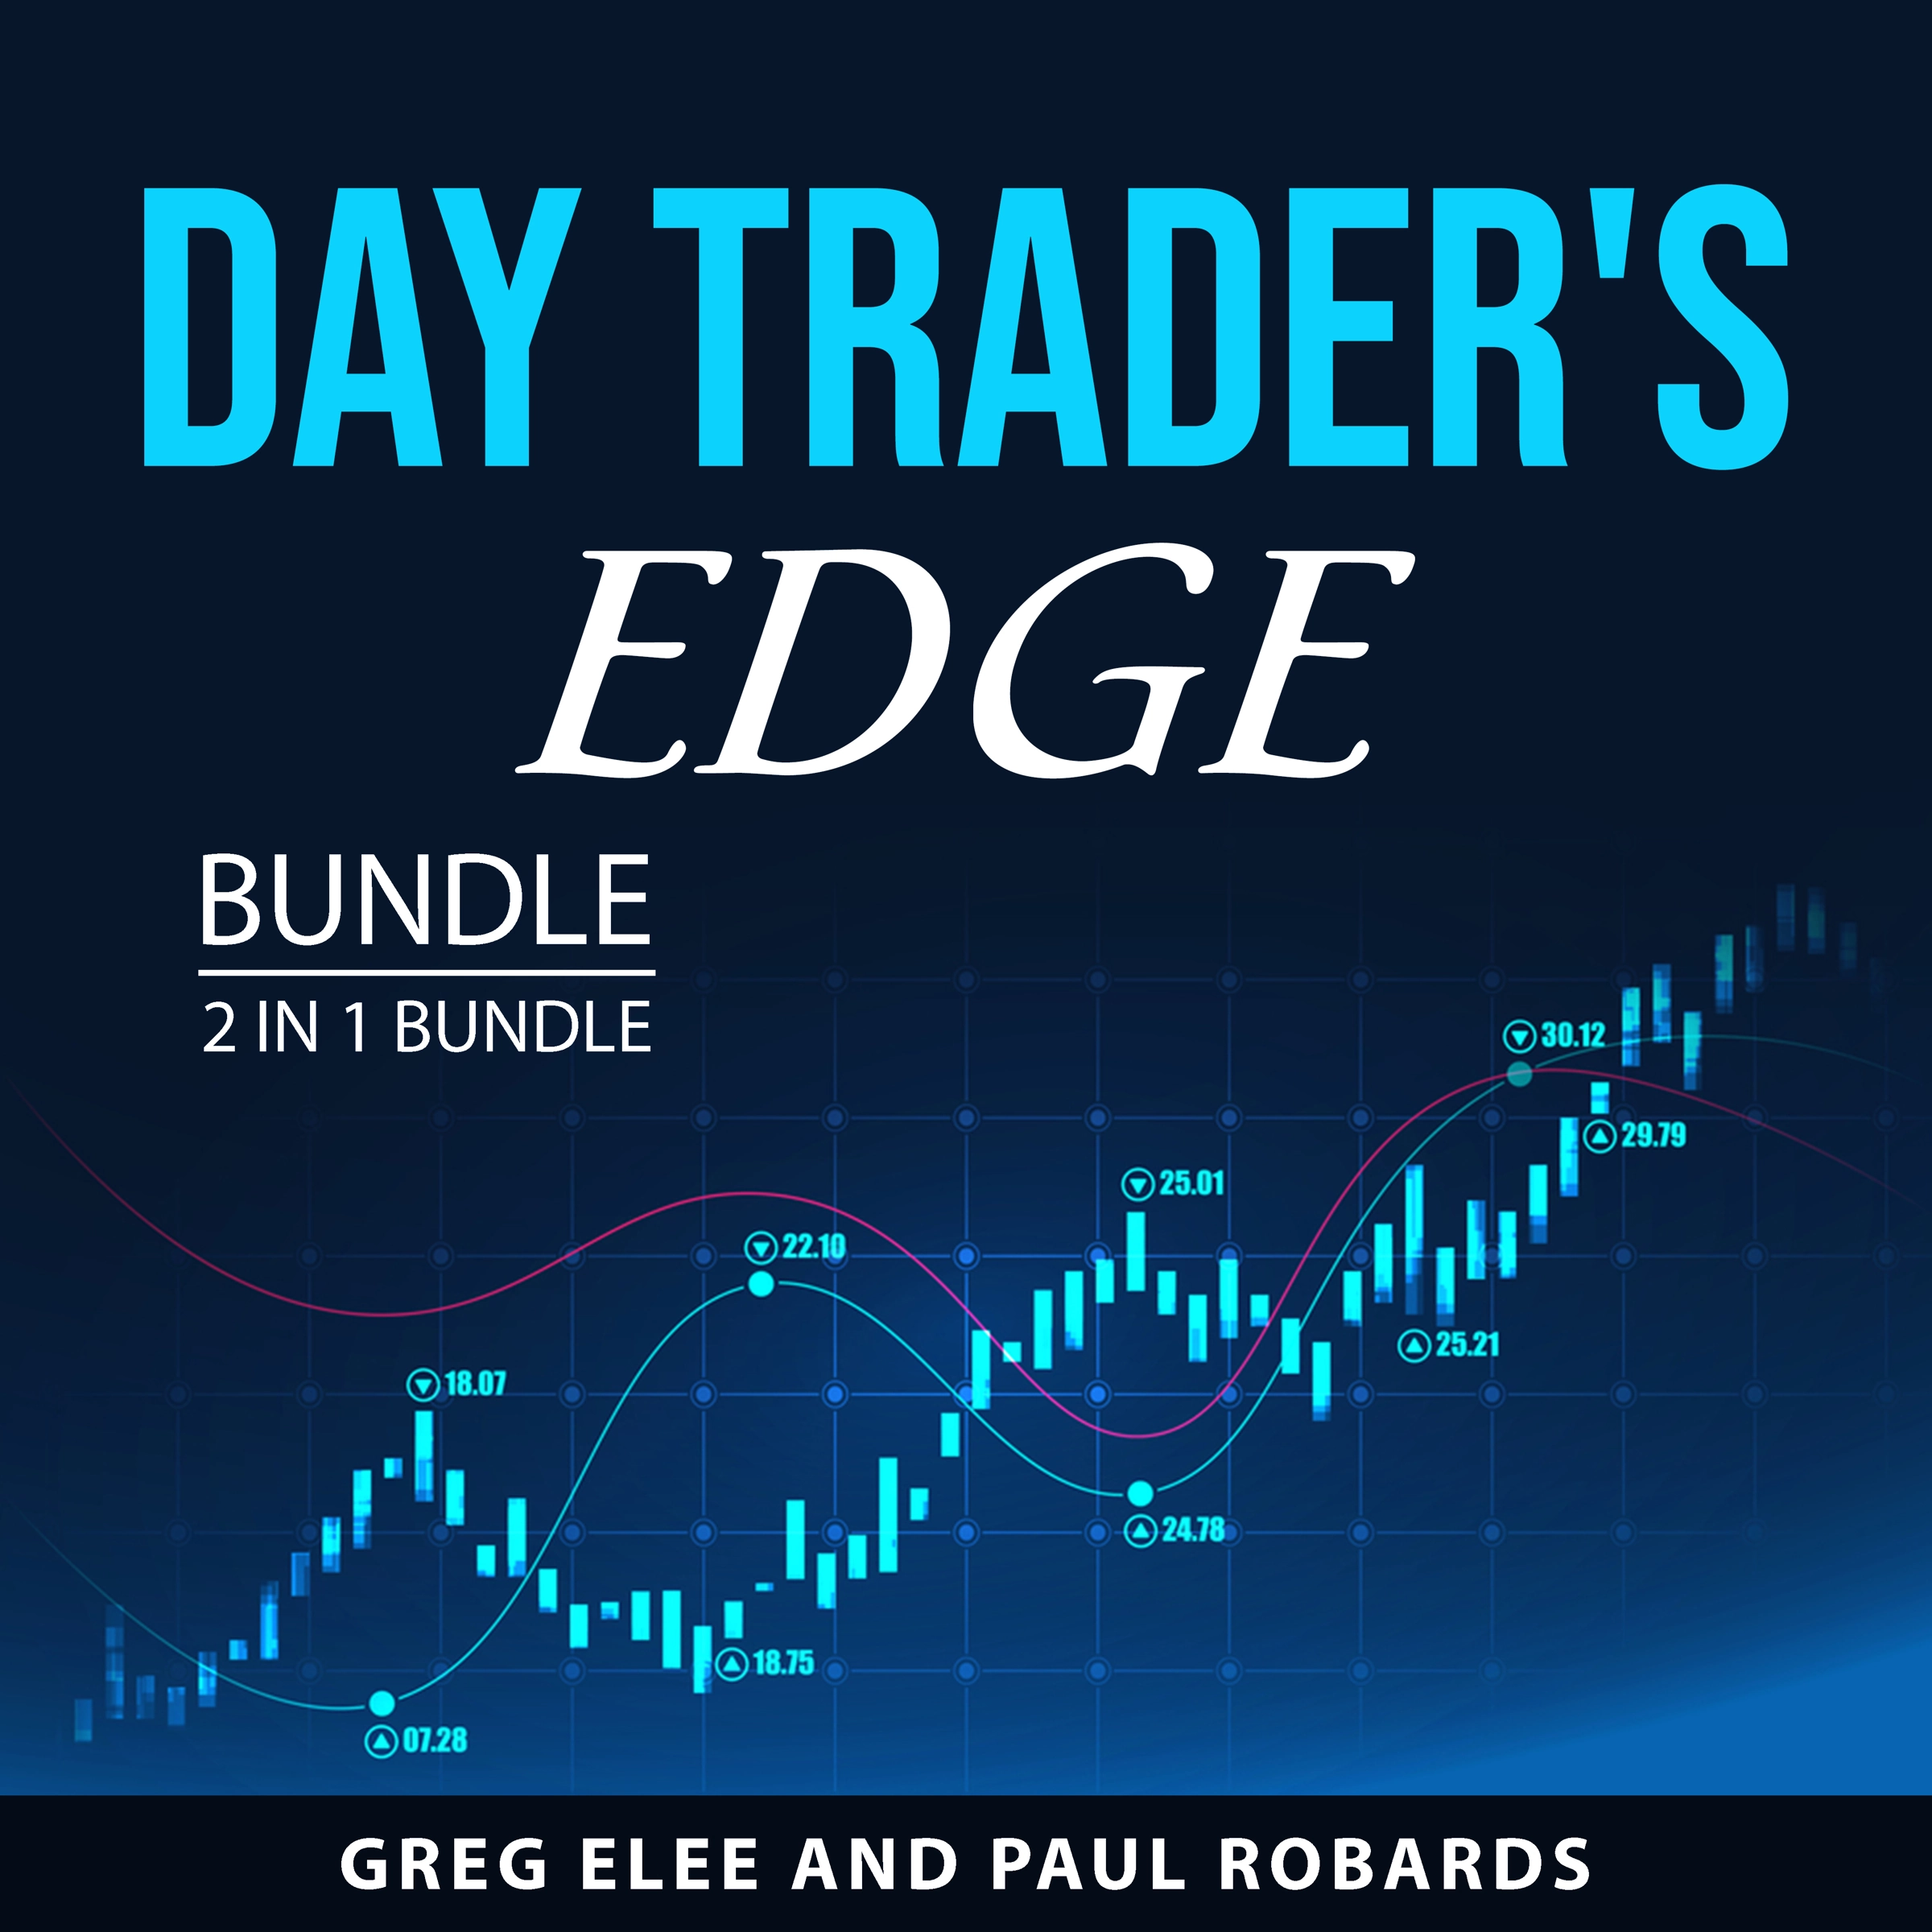 Day Trader's Edge Bundle, 2 in 1 Bundle by Paul Robards Audiobook